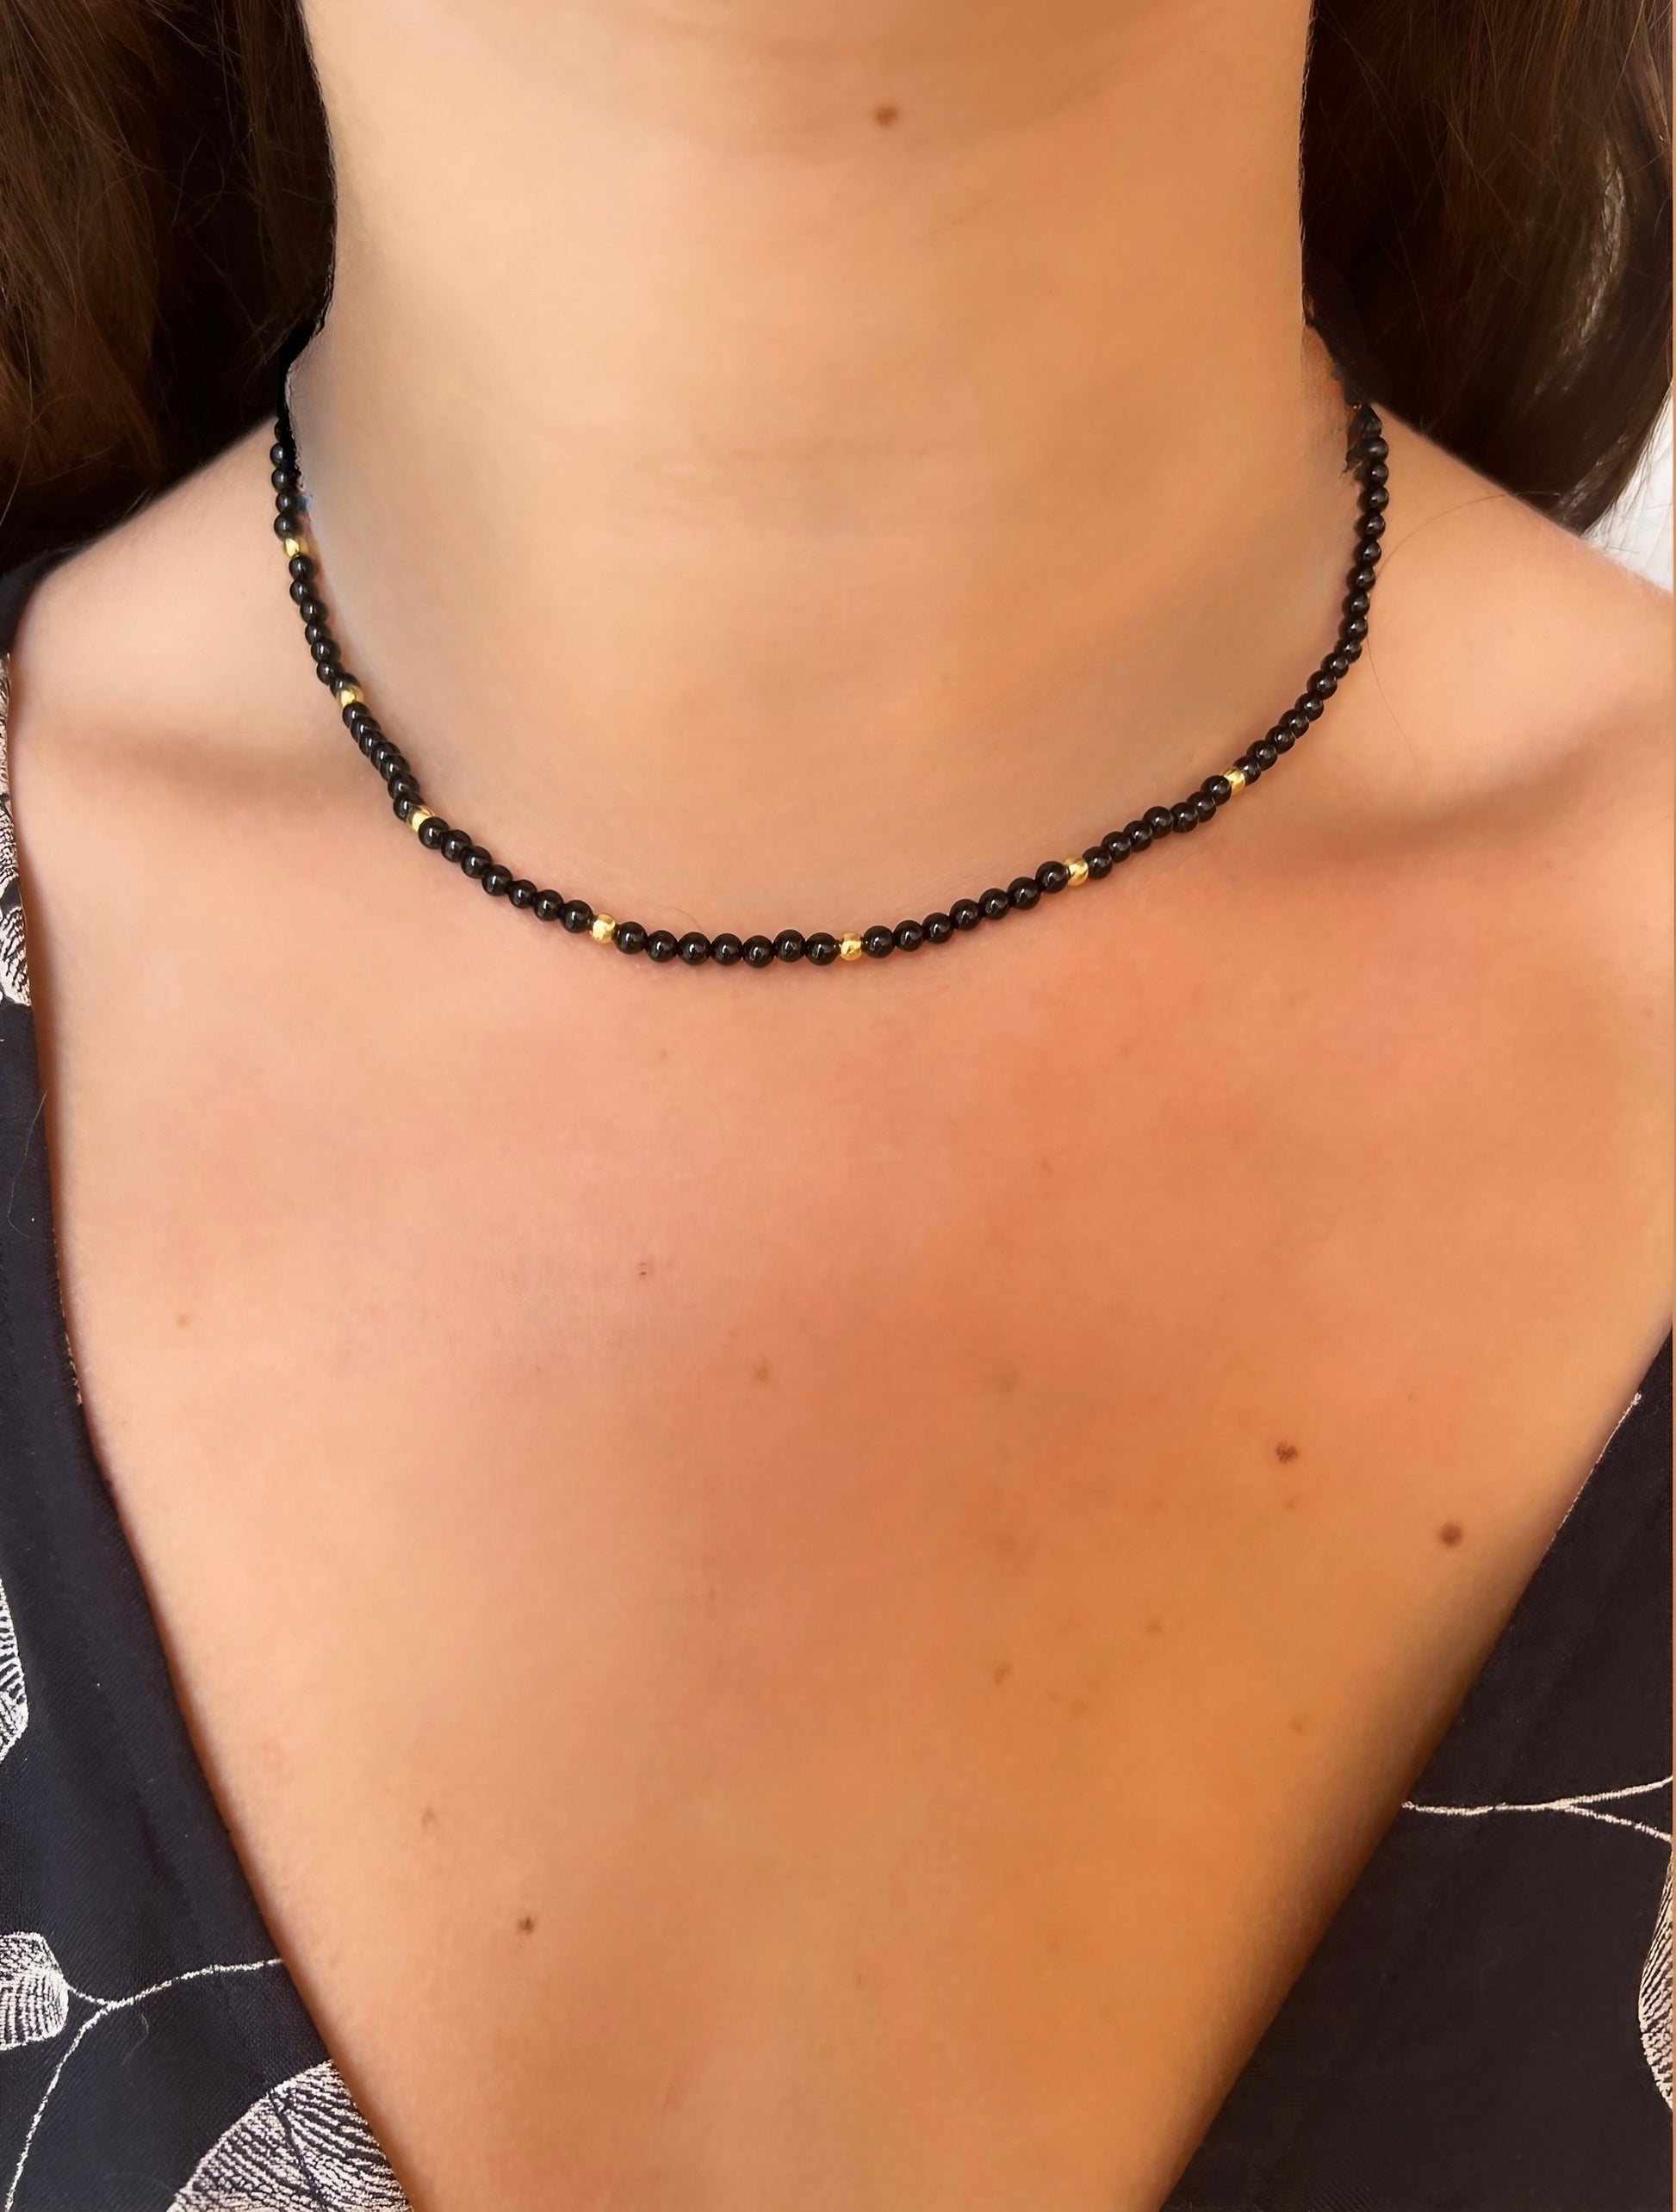 Black Onyx beaded choker necklace with 18k solid gold beads and findings handcrafted | Ella Creations Jewelry